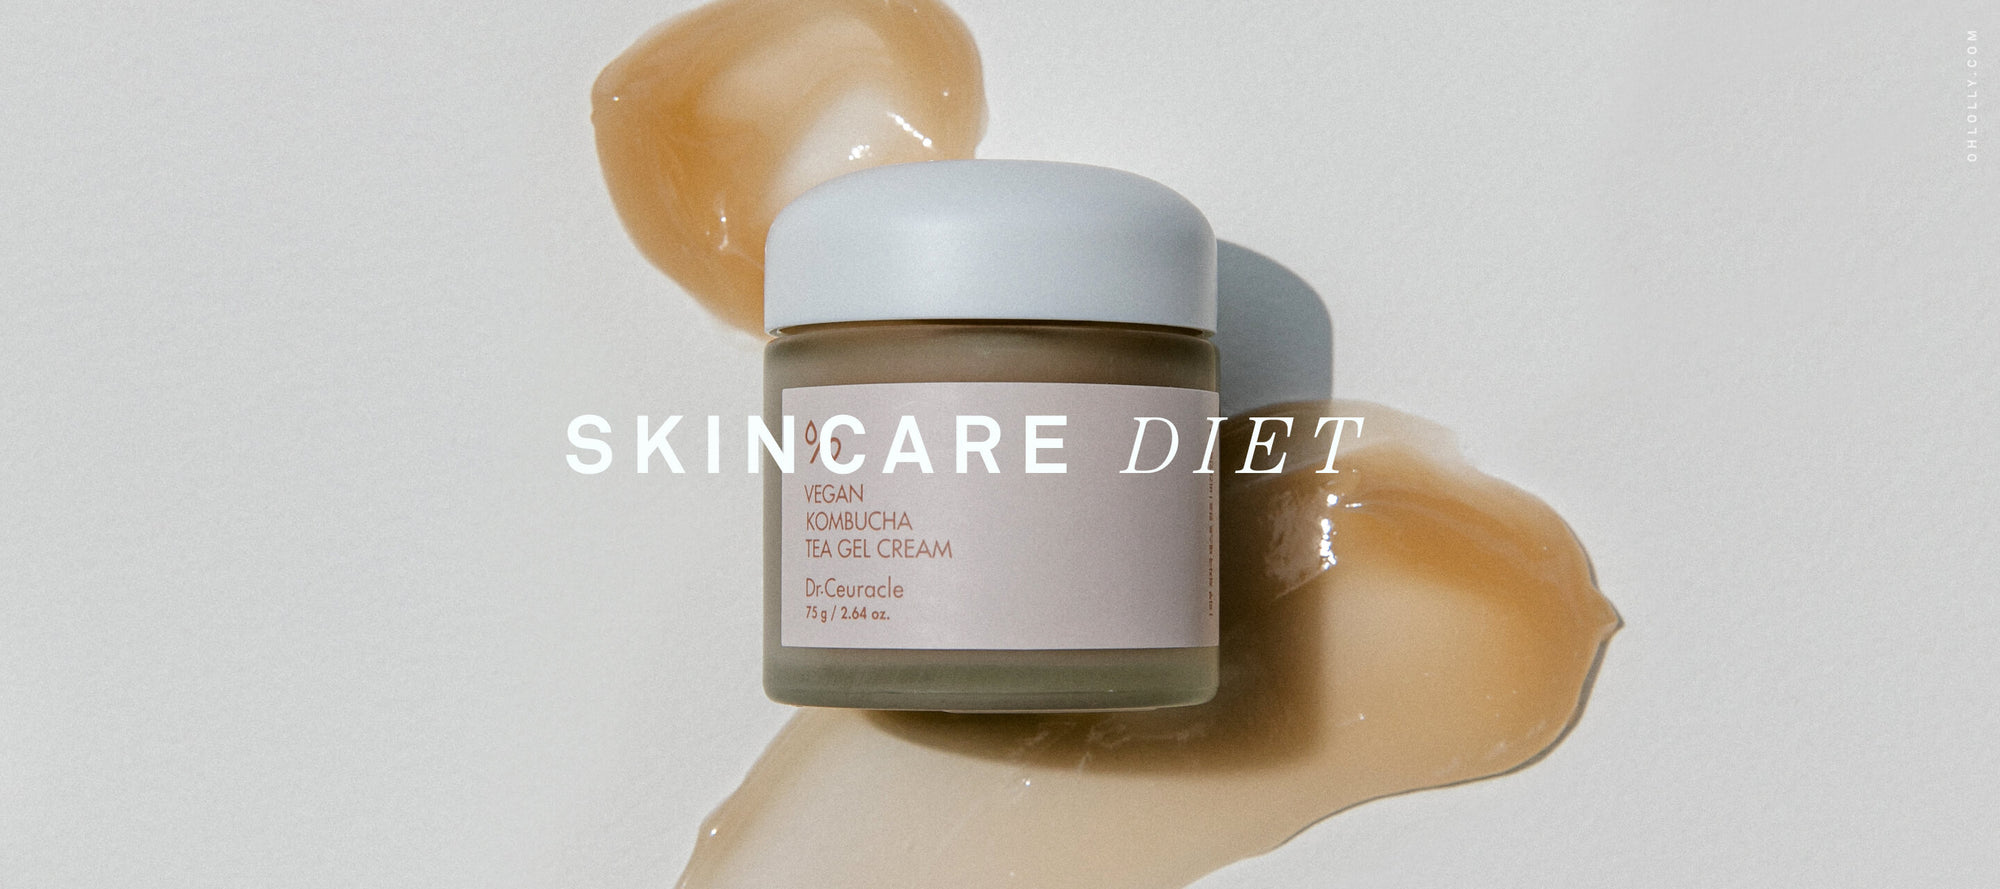 What Is a "Skincare Diet"?